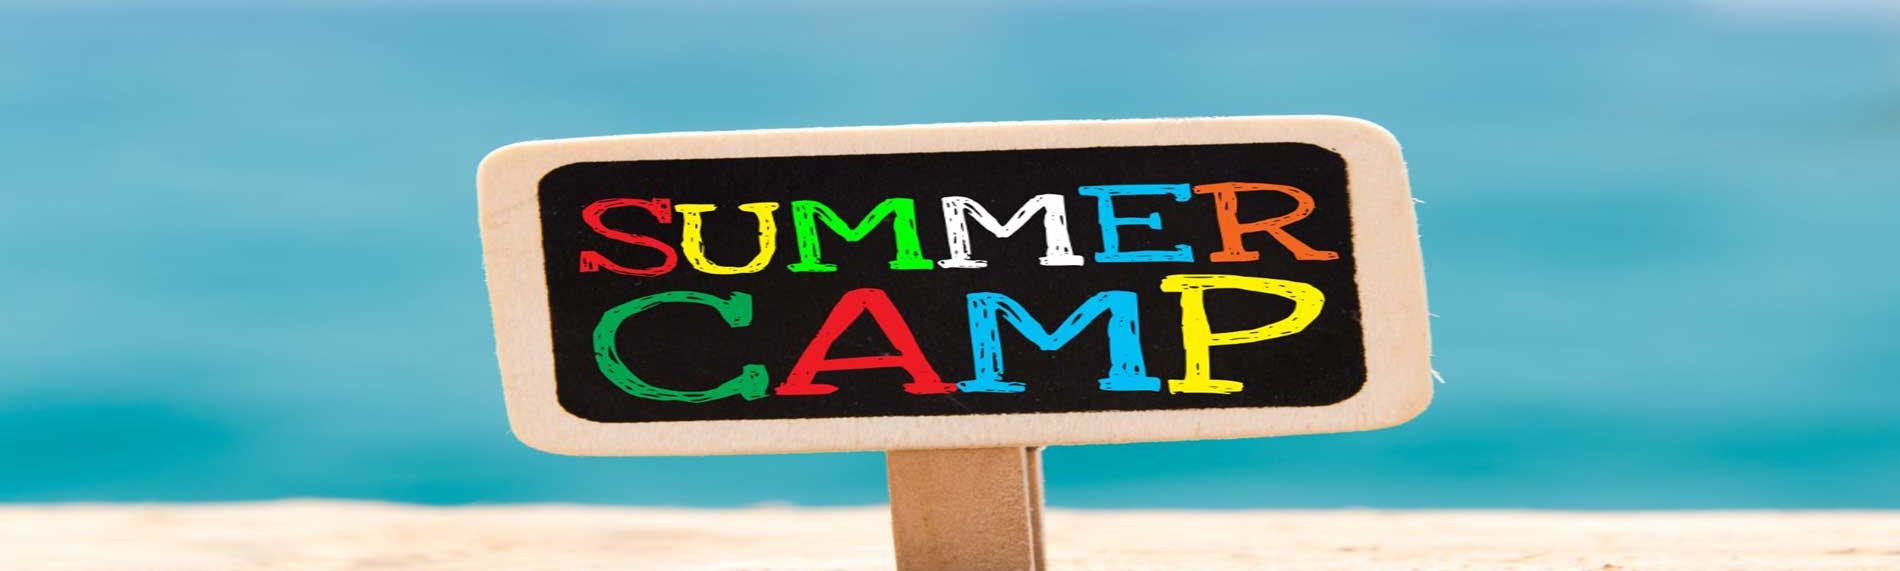 Summer Camps - Cabins